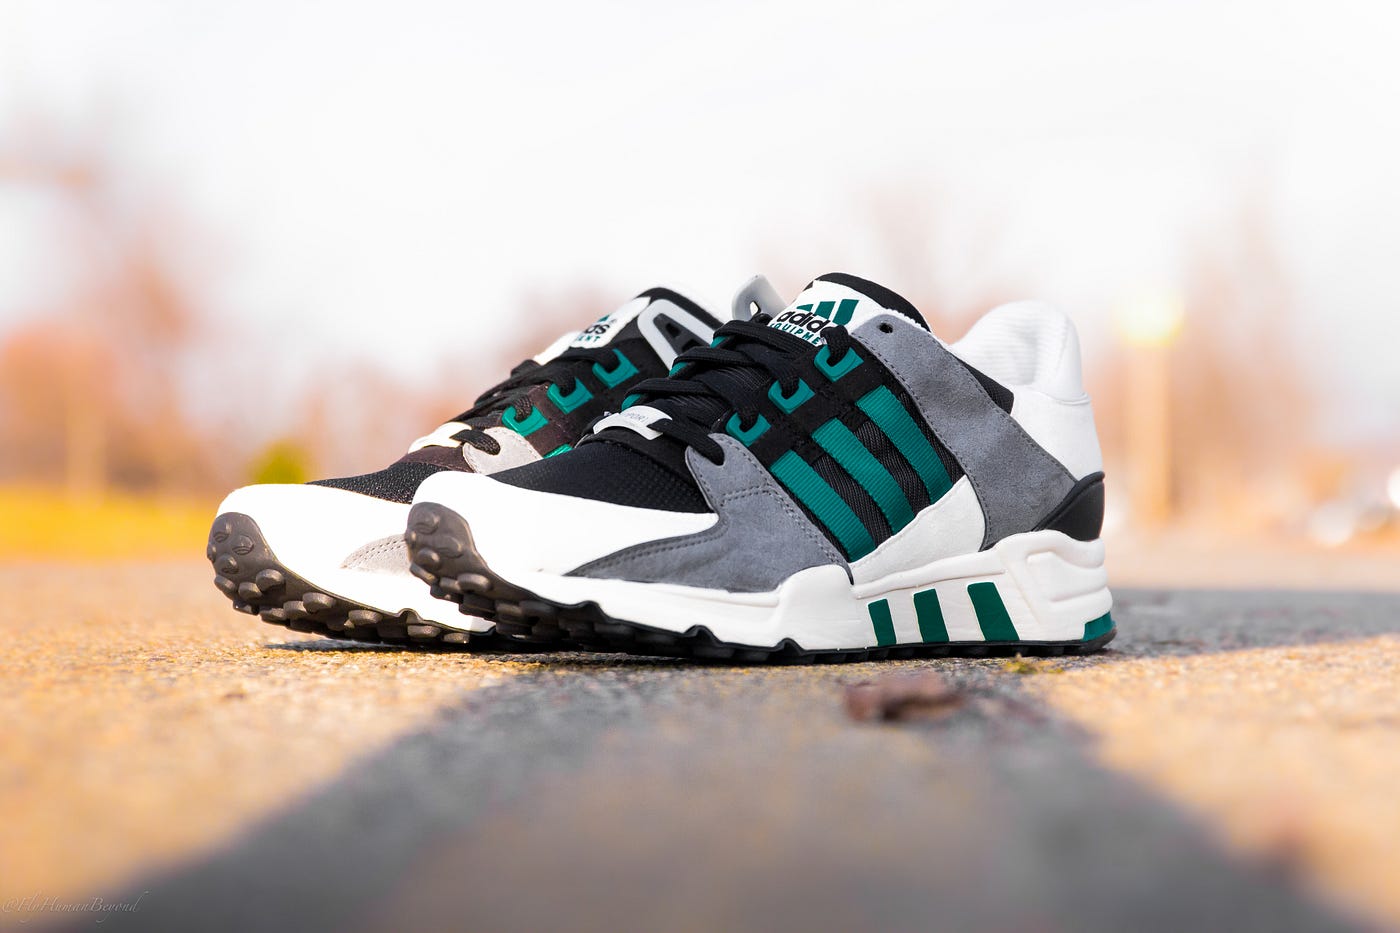 Adidas EQT OG '93. Oh I just missed this one. I remember…